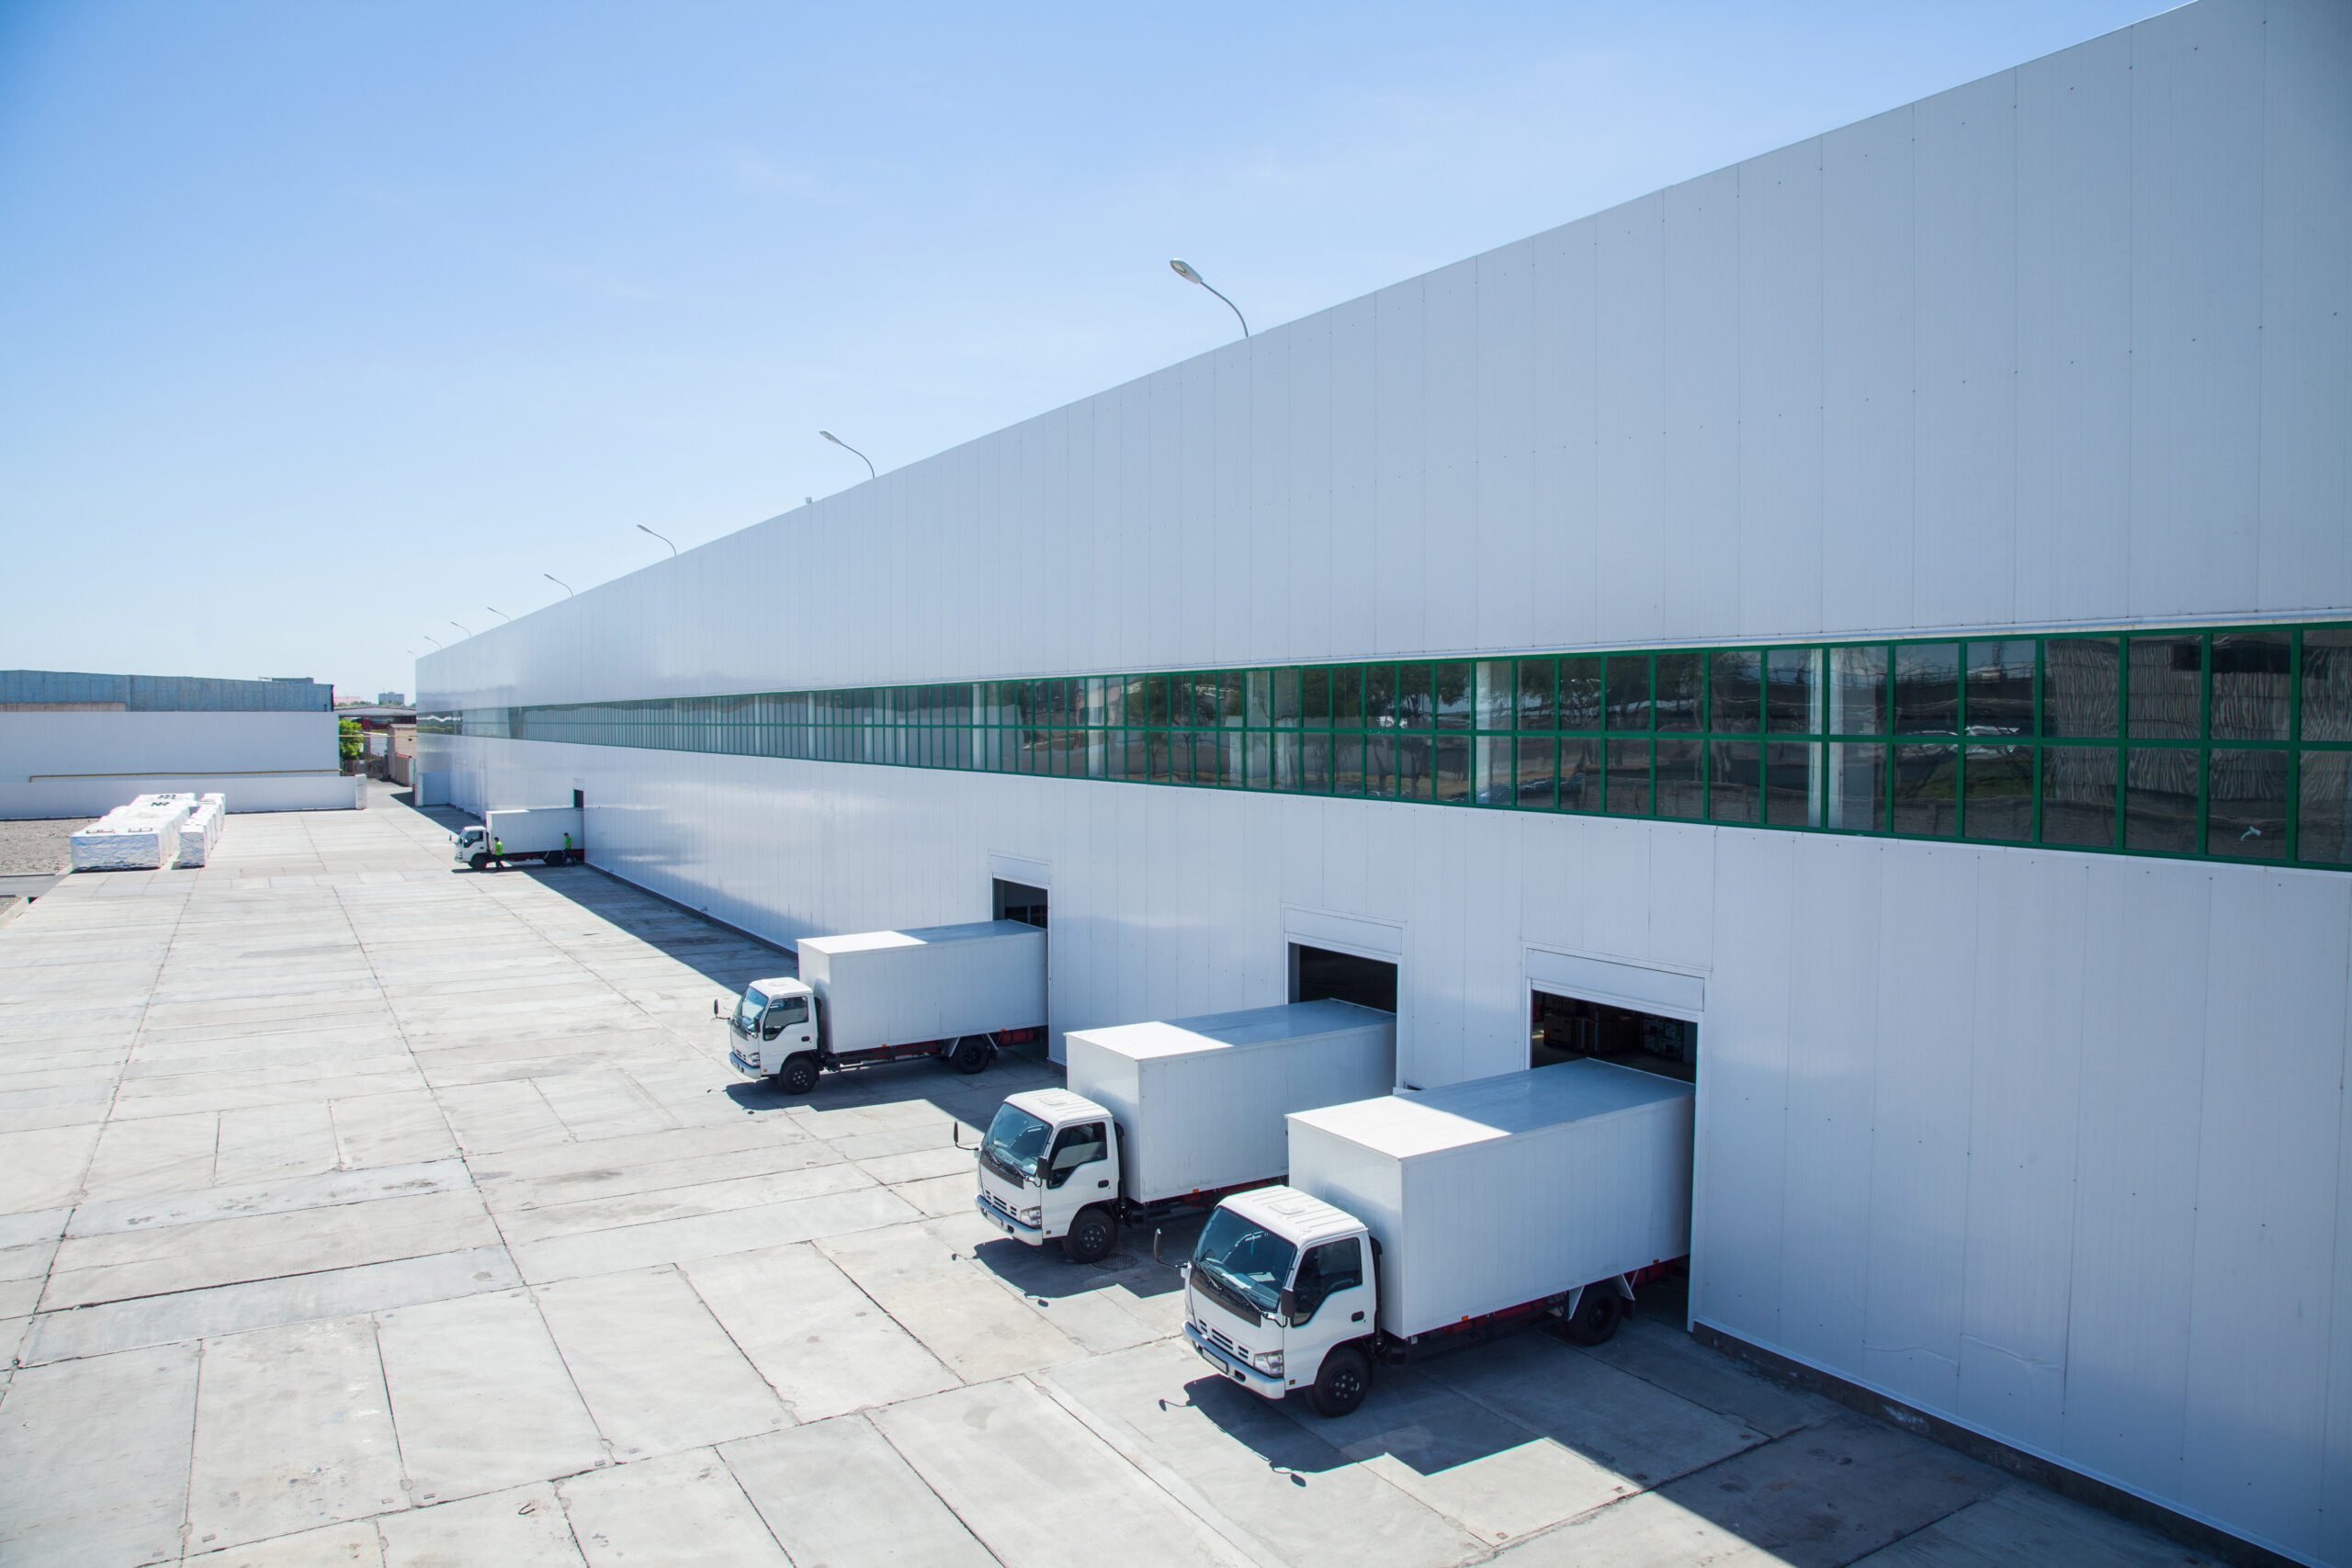 Image of outside a warehouse with a line of warehouse trucks backed into bays